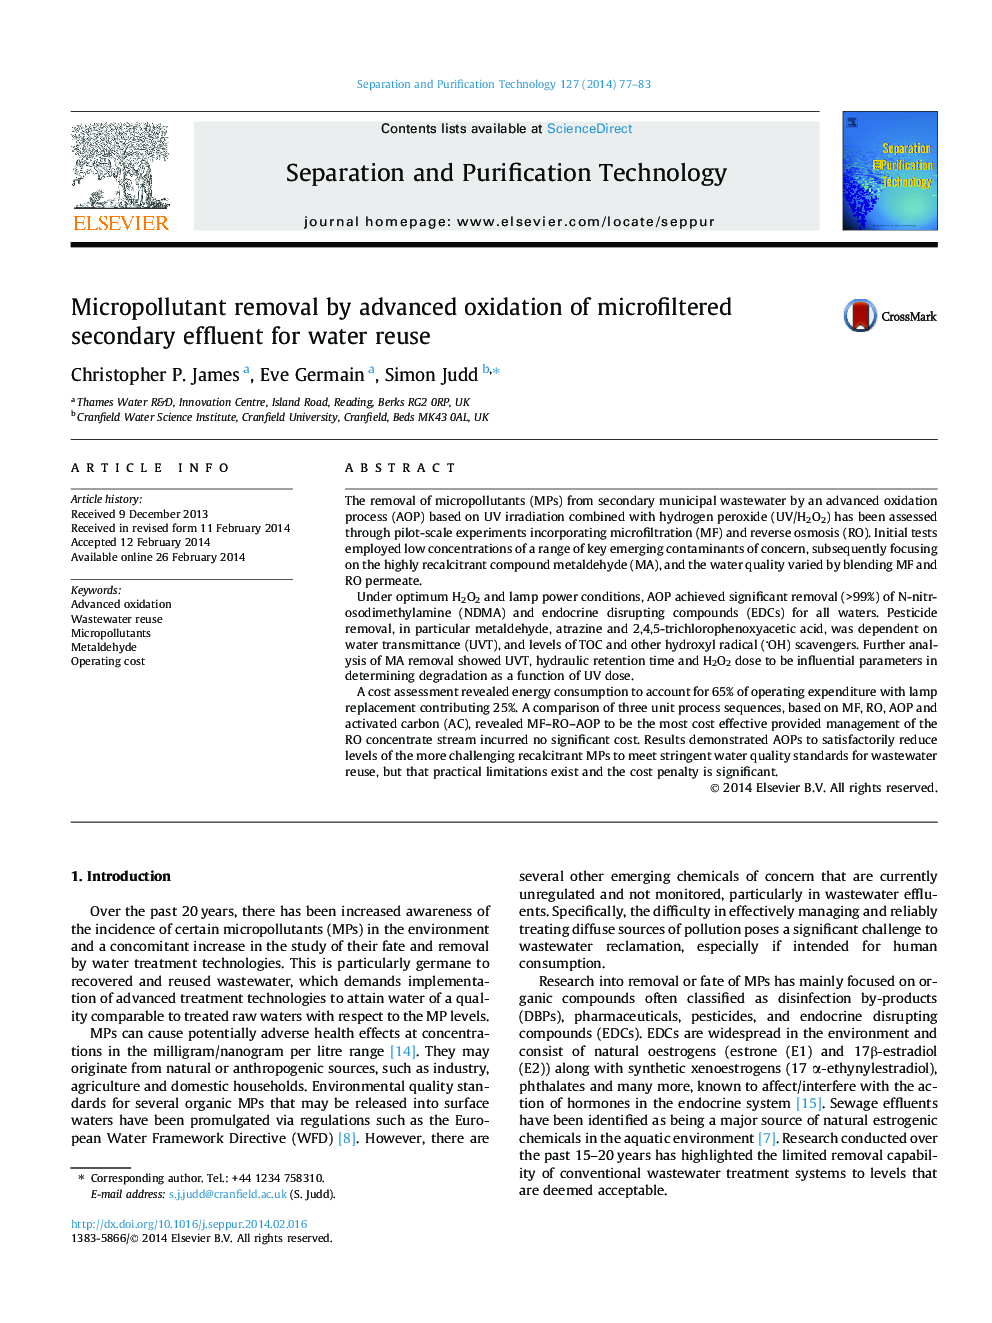 Micropollutant removal by advanced oxidation of microfiltered secondary effluent for water reuse